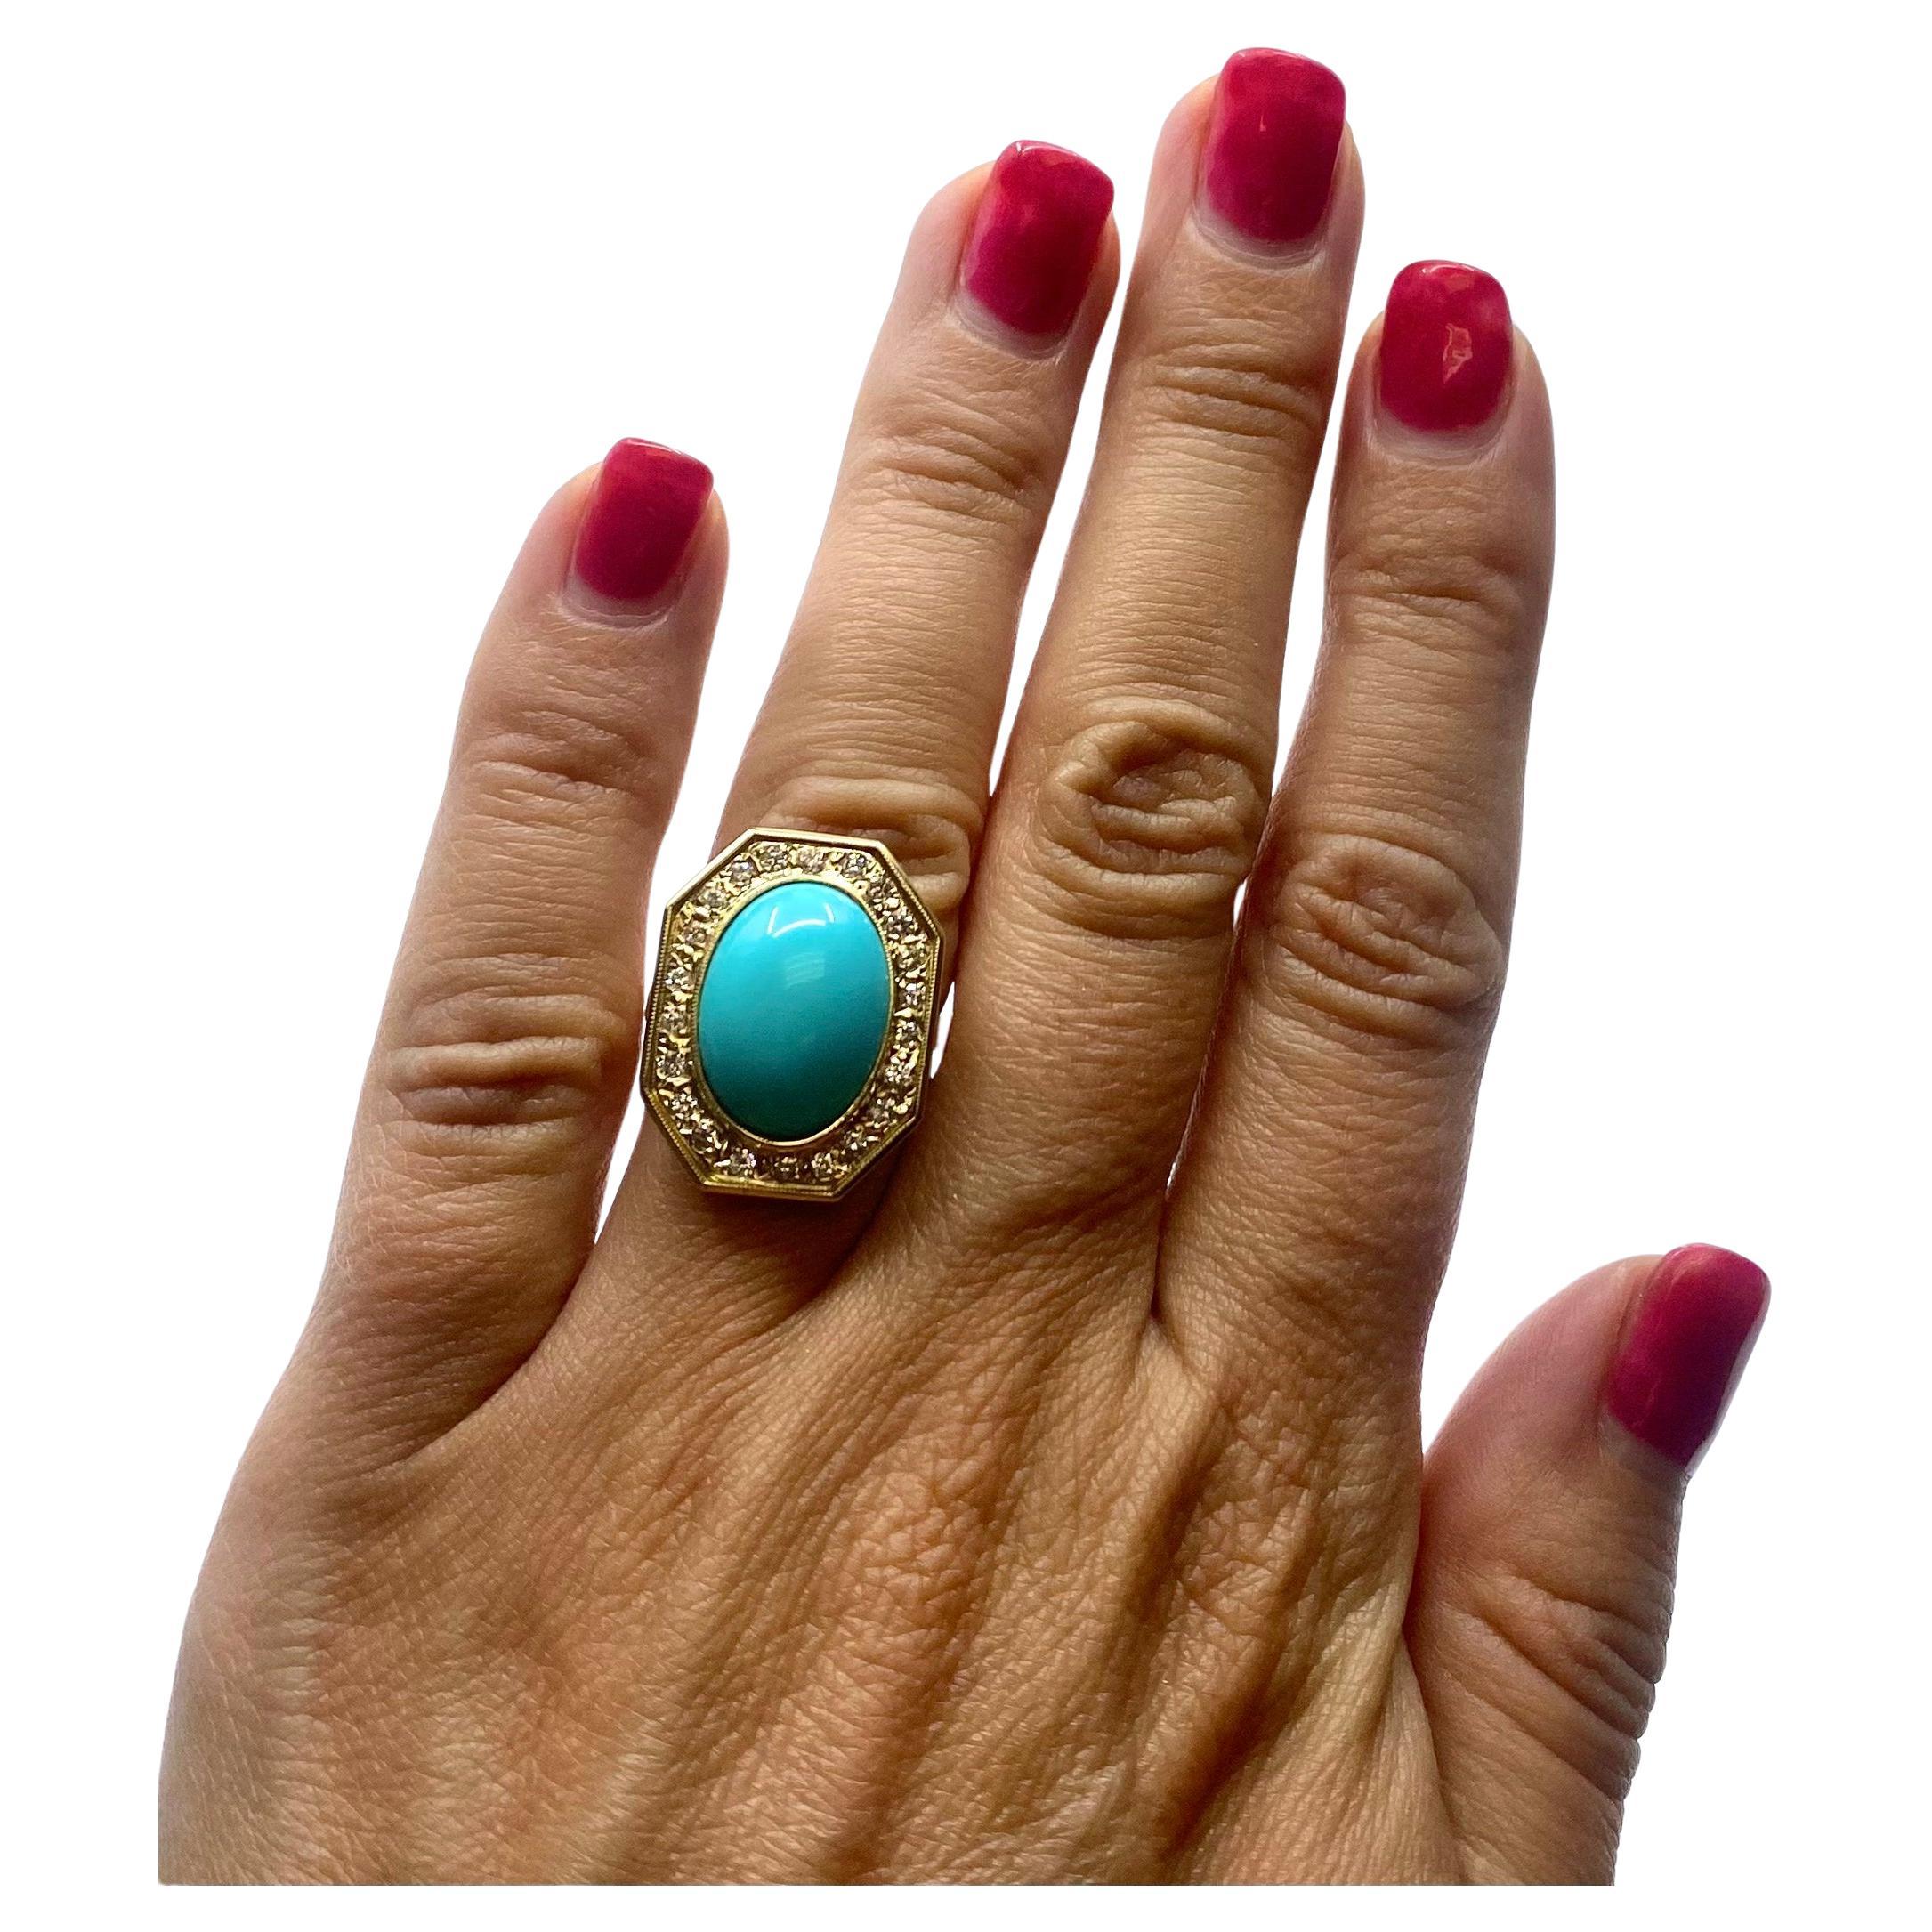 A gorgeous octagon shape turquoise ring, made of 14k gold, features diamonds. The turquoise of a great robin egg blue color is cabochon cut. The hammered gold octagon frame is adorned with diamonds. The gems dazzle being set in the textured gold